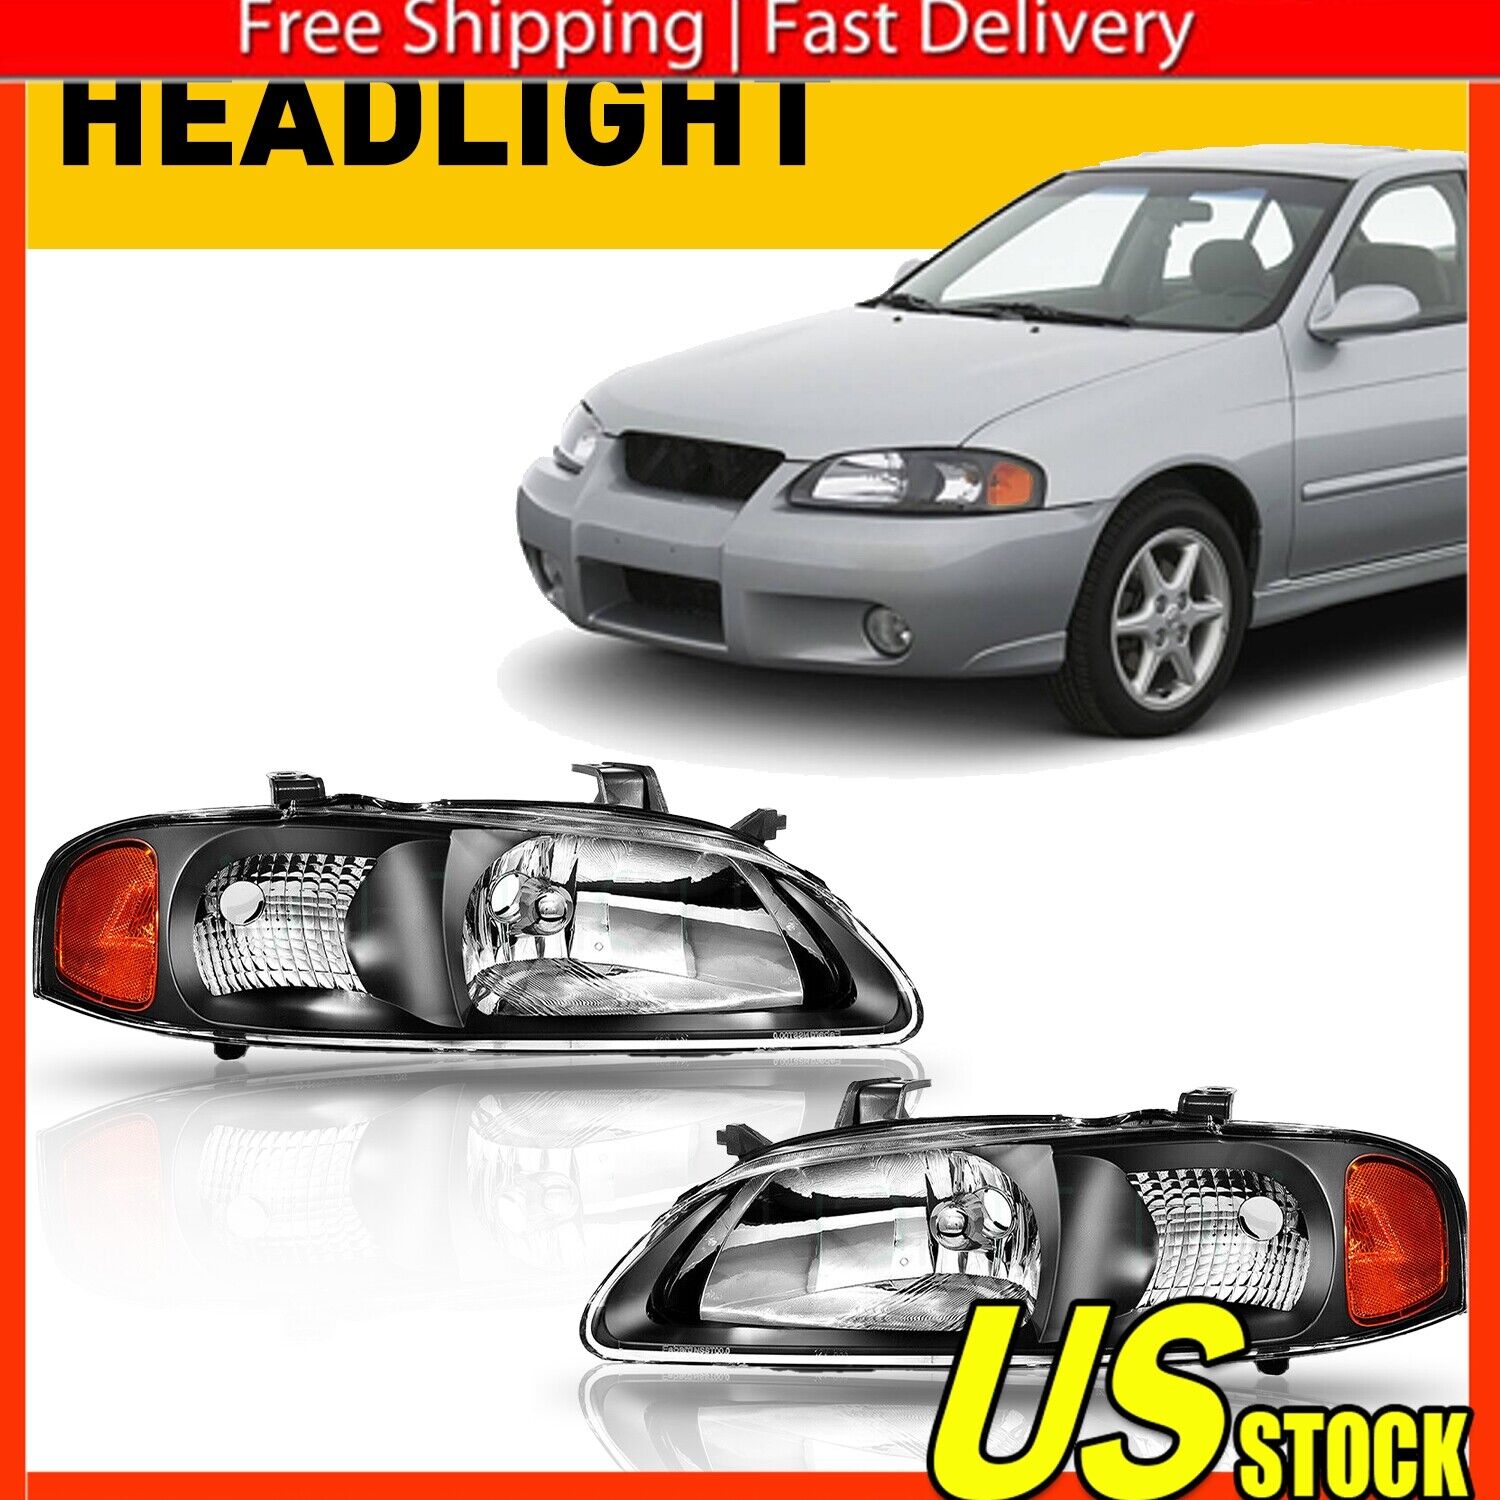 Black Fits 2000-2003 Sentra Headlights Lamps Assembly Left+Right 00 01 02 03